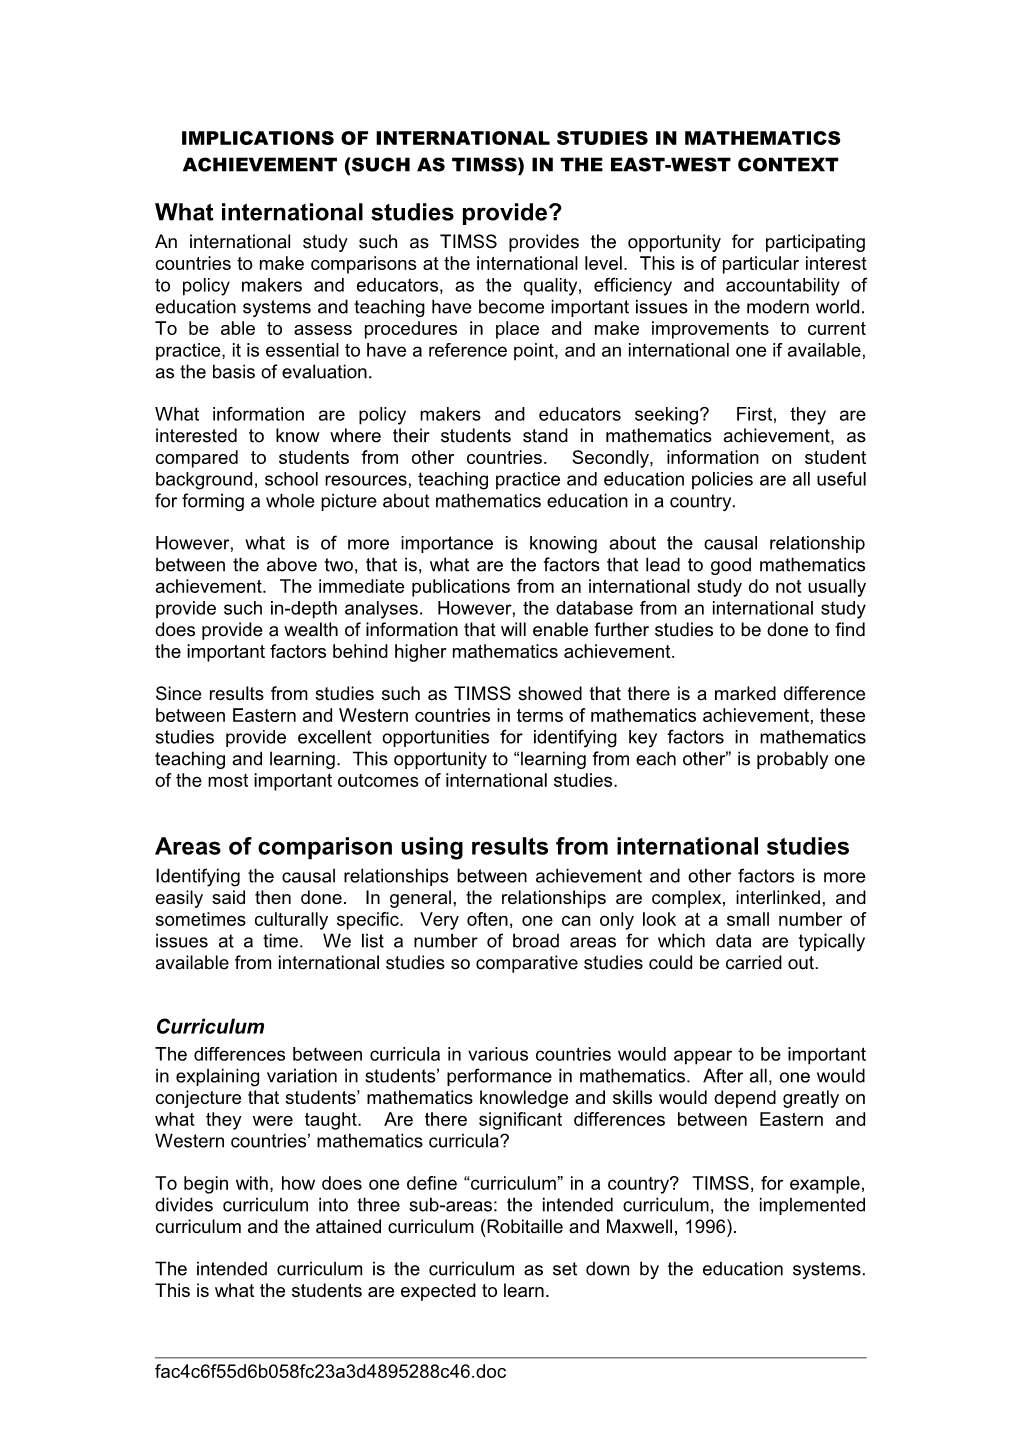 Implications of International Studies in Mathematics Achievement (Such As TIMSS) in The